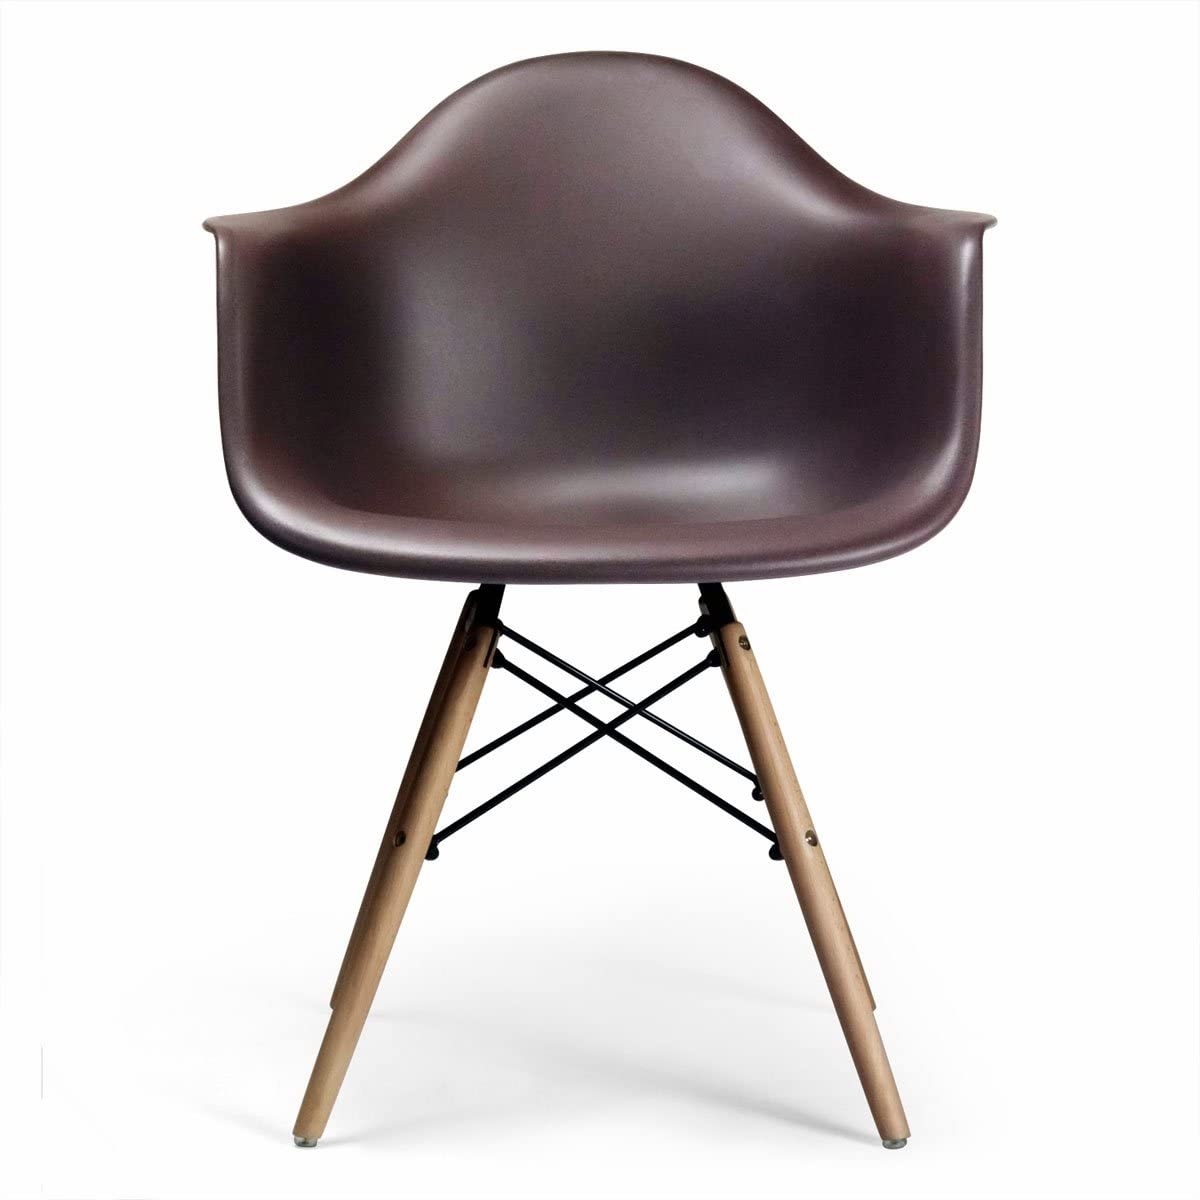 Molded Plastic Armchair with Wood Legs, Set of 2, Brown Matte Replica